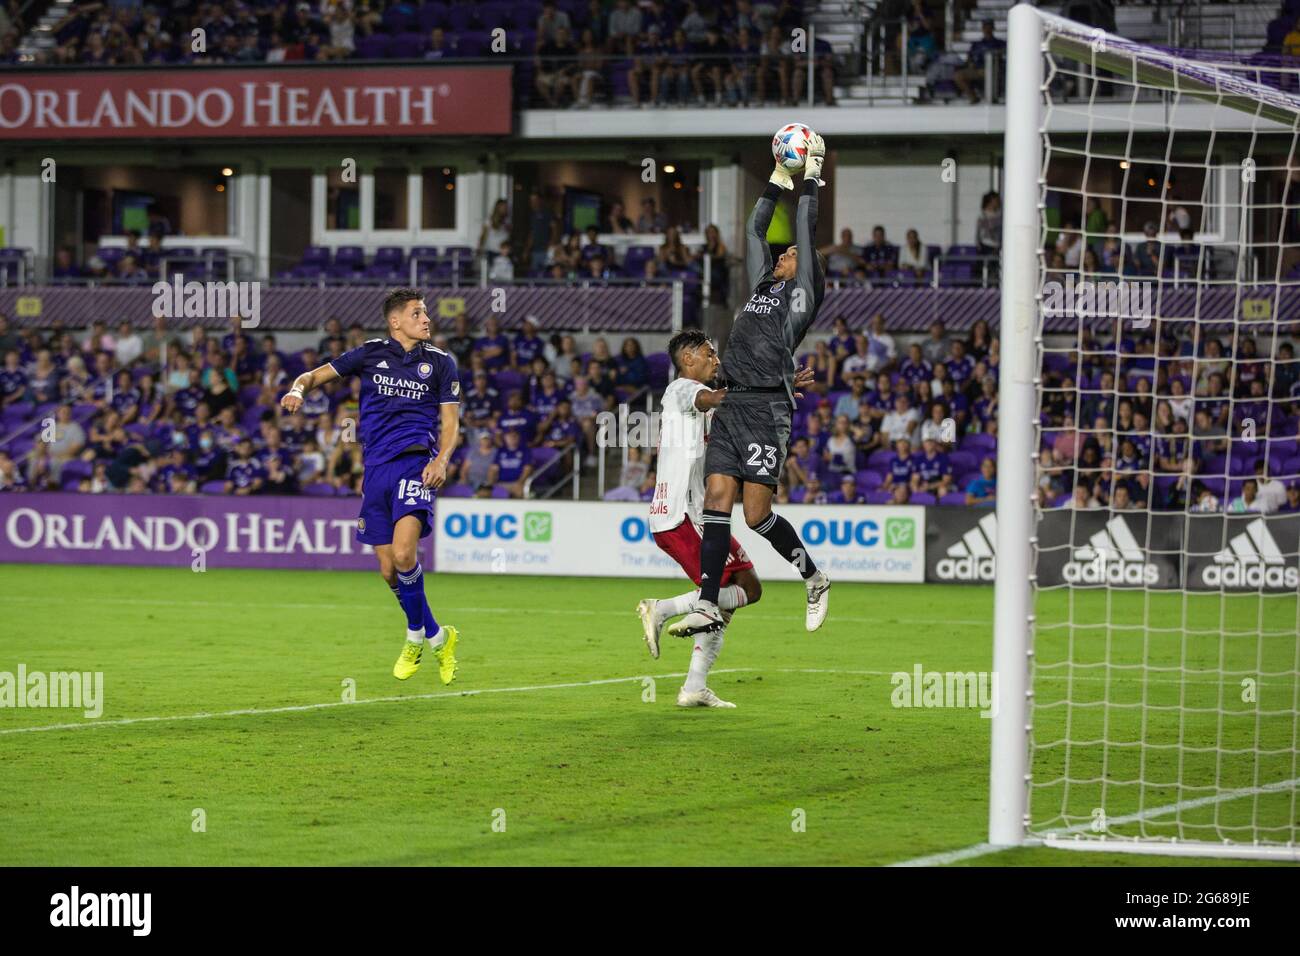 Exploria Stadium Orlando, FL, USA. 8th July, 2021. Orlando City SC goalkeeper Brandon Austin (23) jumps to grab the ball out of midair during MLS action between the NY Red Bulls and the Orlando City SC at Exploria Stadium Orlando, FL. New York defeats Orlando 2 - 1. Jonathan Huff/CSM/Alamy Live News Stock Photo